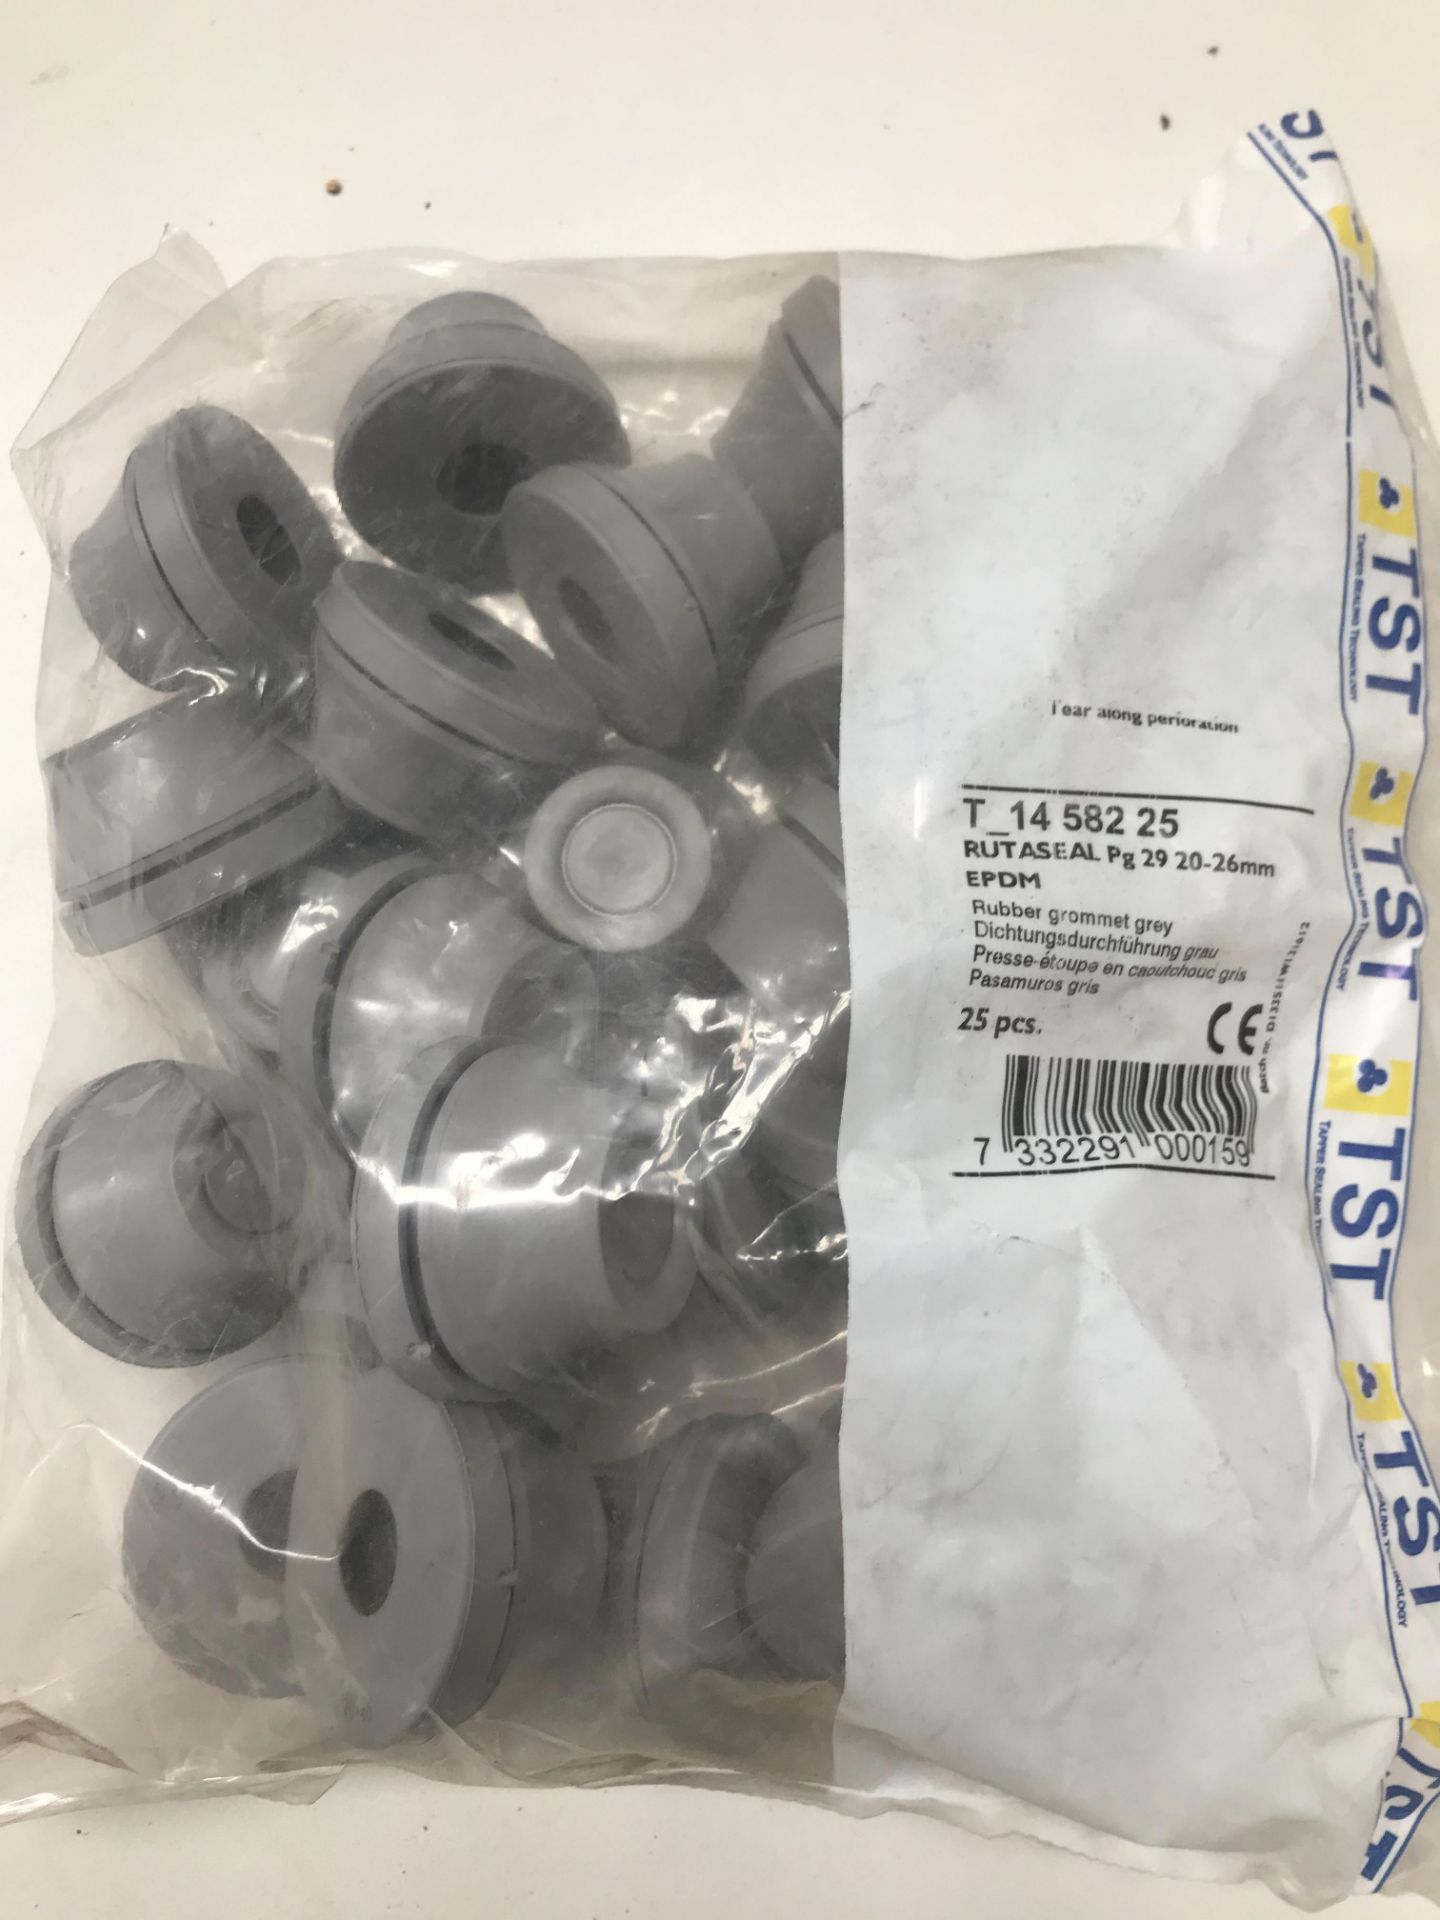 Large Quantity of Rutaseal Grommets - Image 2 of 3